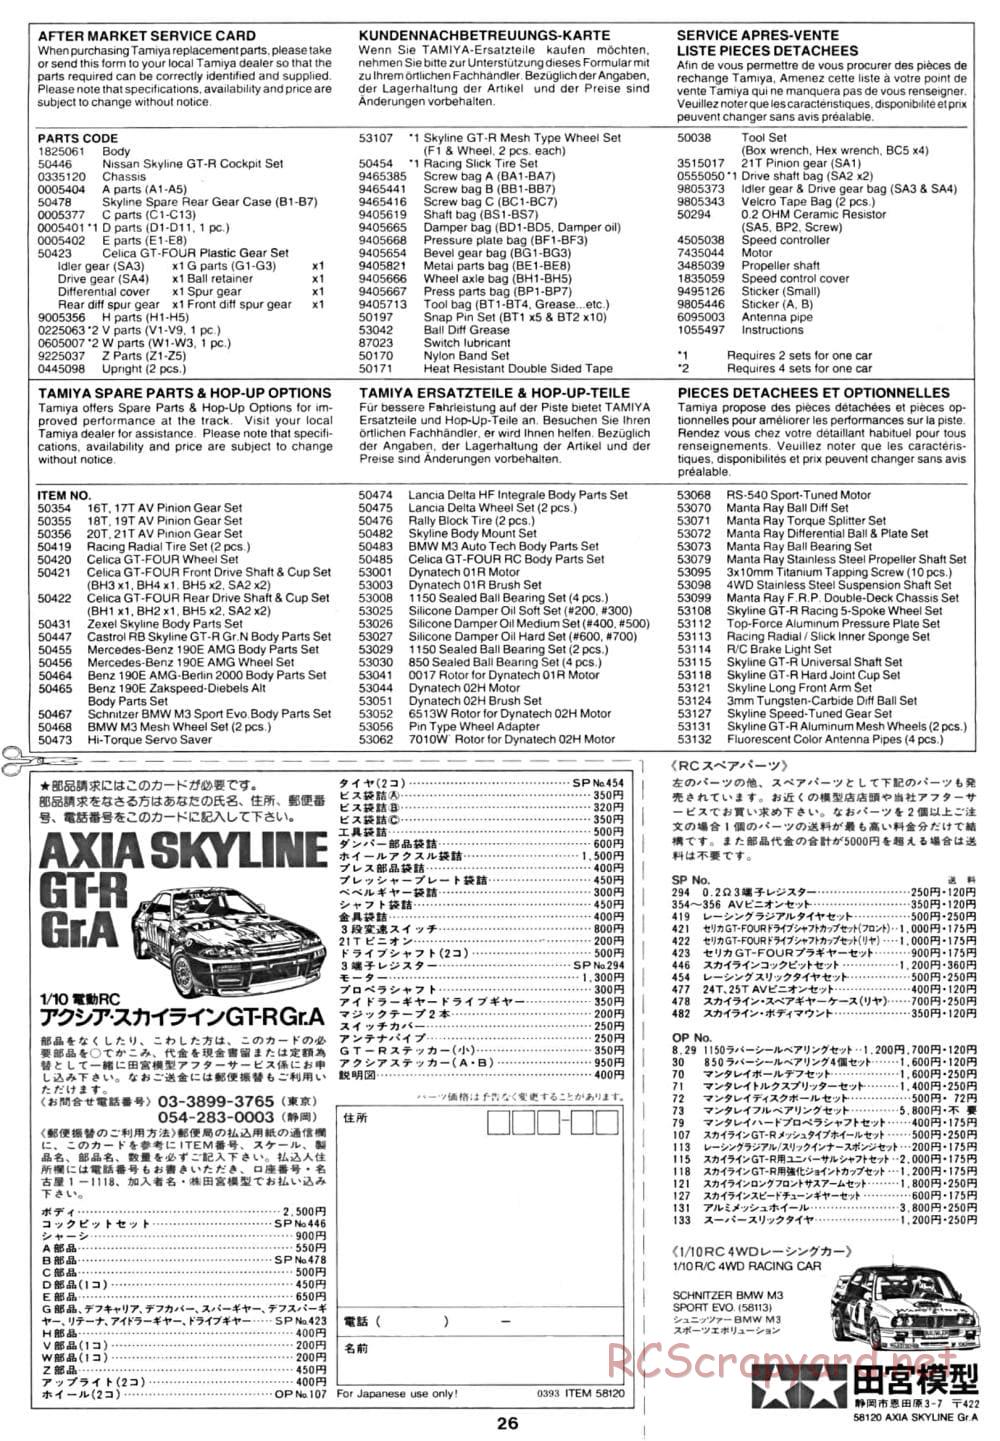 Tamiya - Axia Skyline GT-R Gr.A - TA-01 Chassis - Manual - Page 27